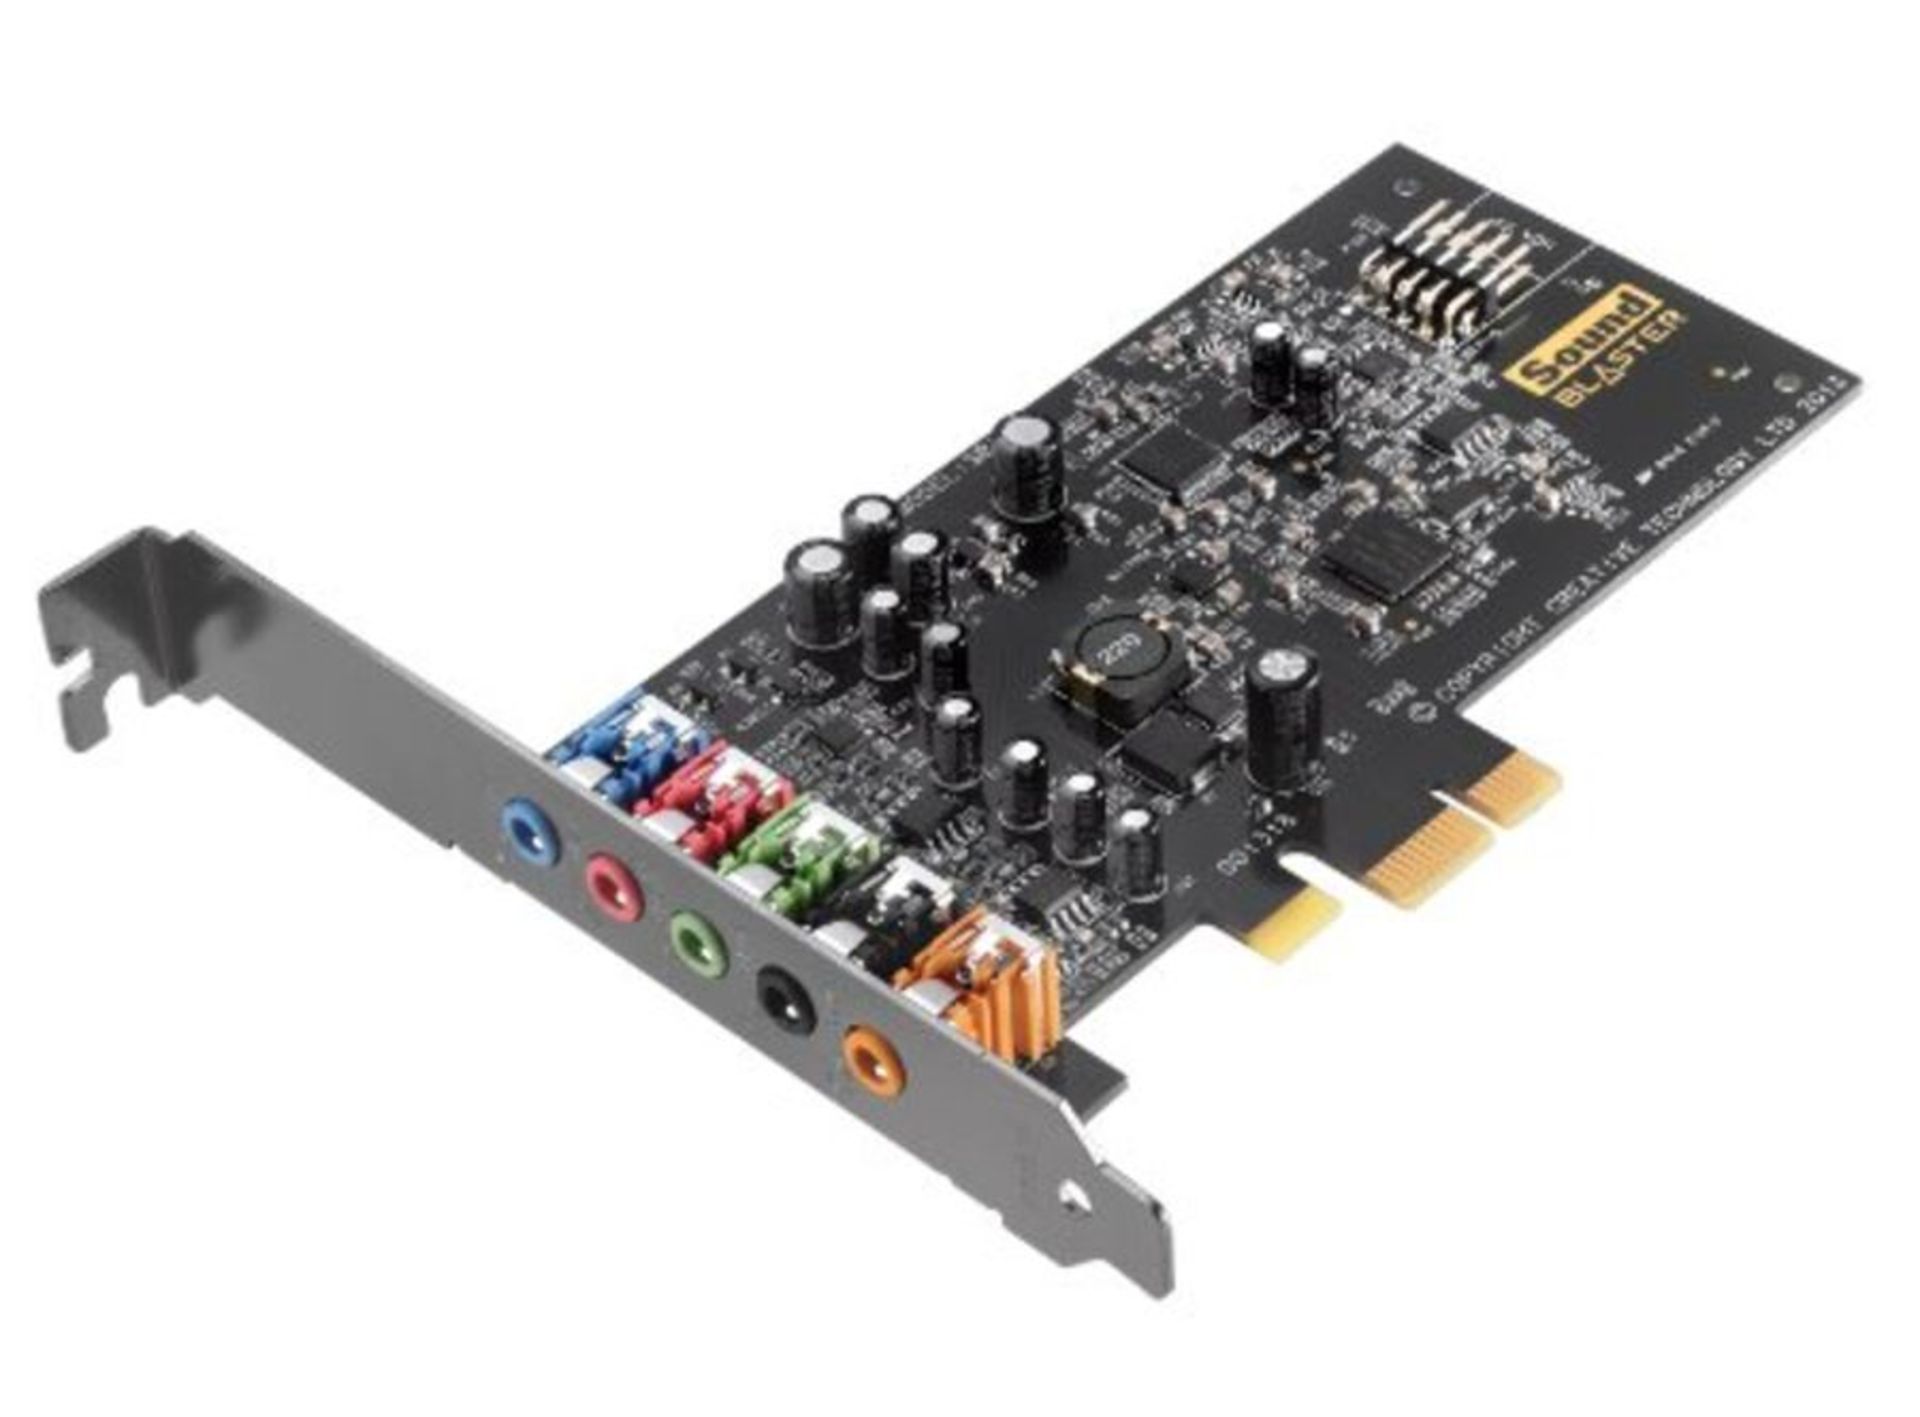 Creative Blaster Audigy Fx 5.1 PCIe Sound Card with SBX Pro Studio